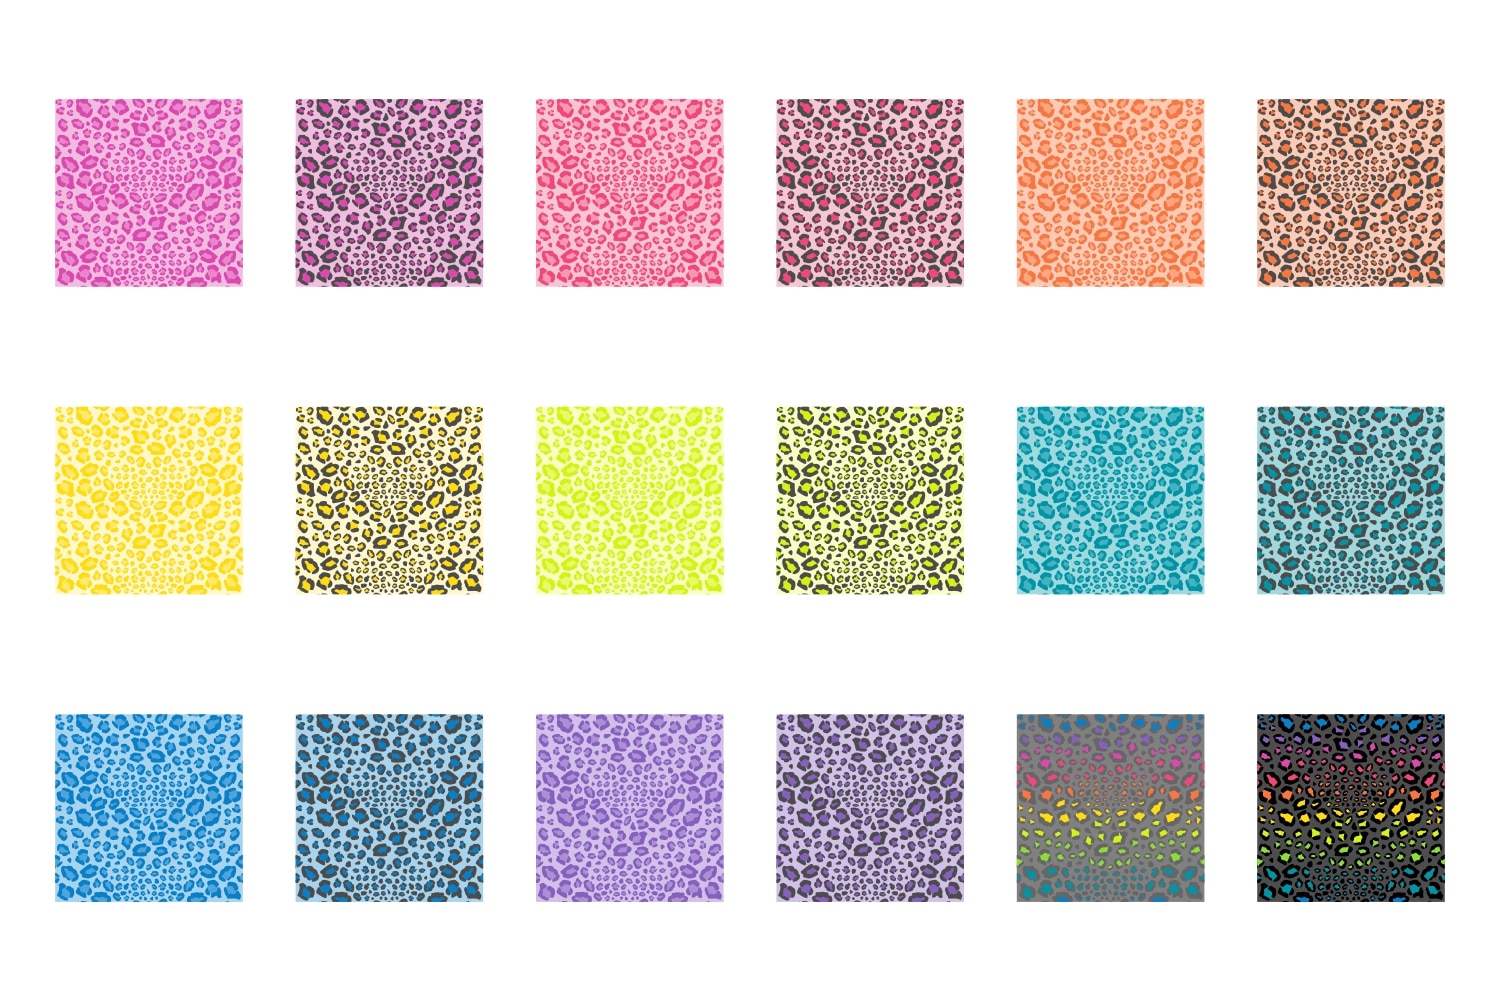 Assorted Leopard Pattern Images